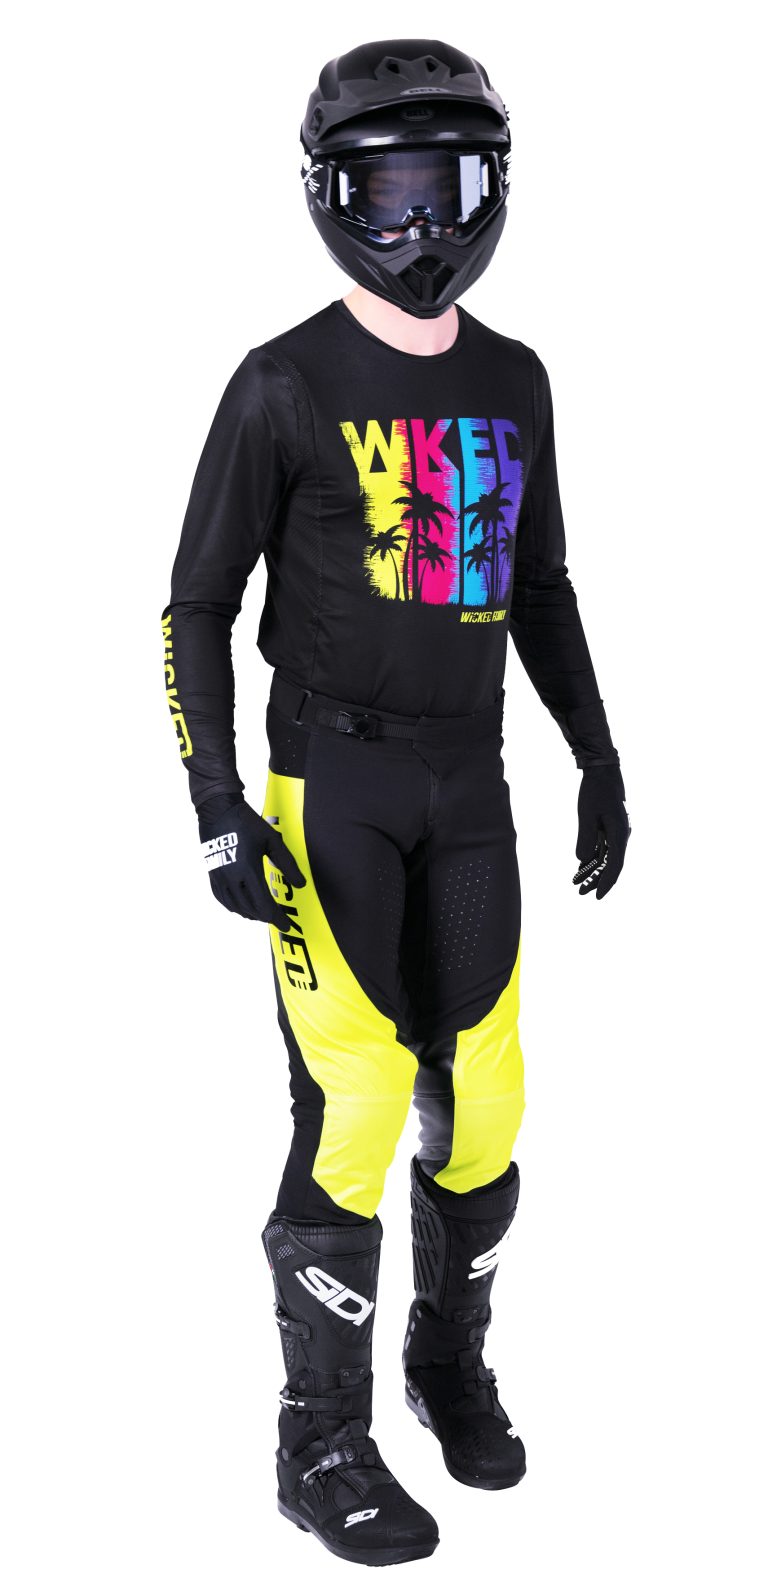 Tropical mx gear with neon pants